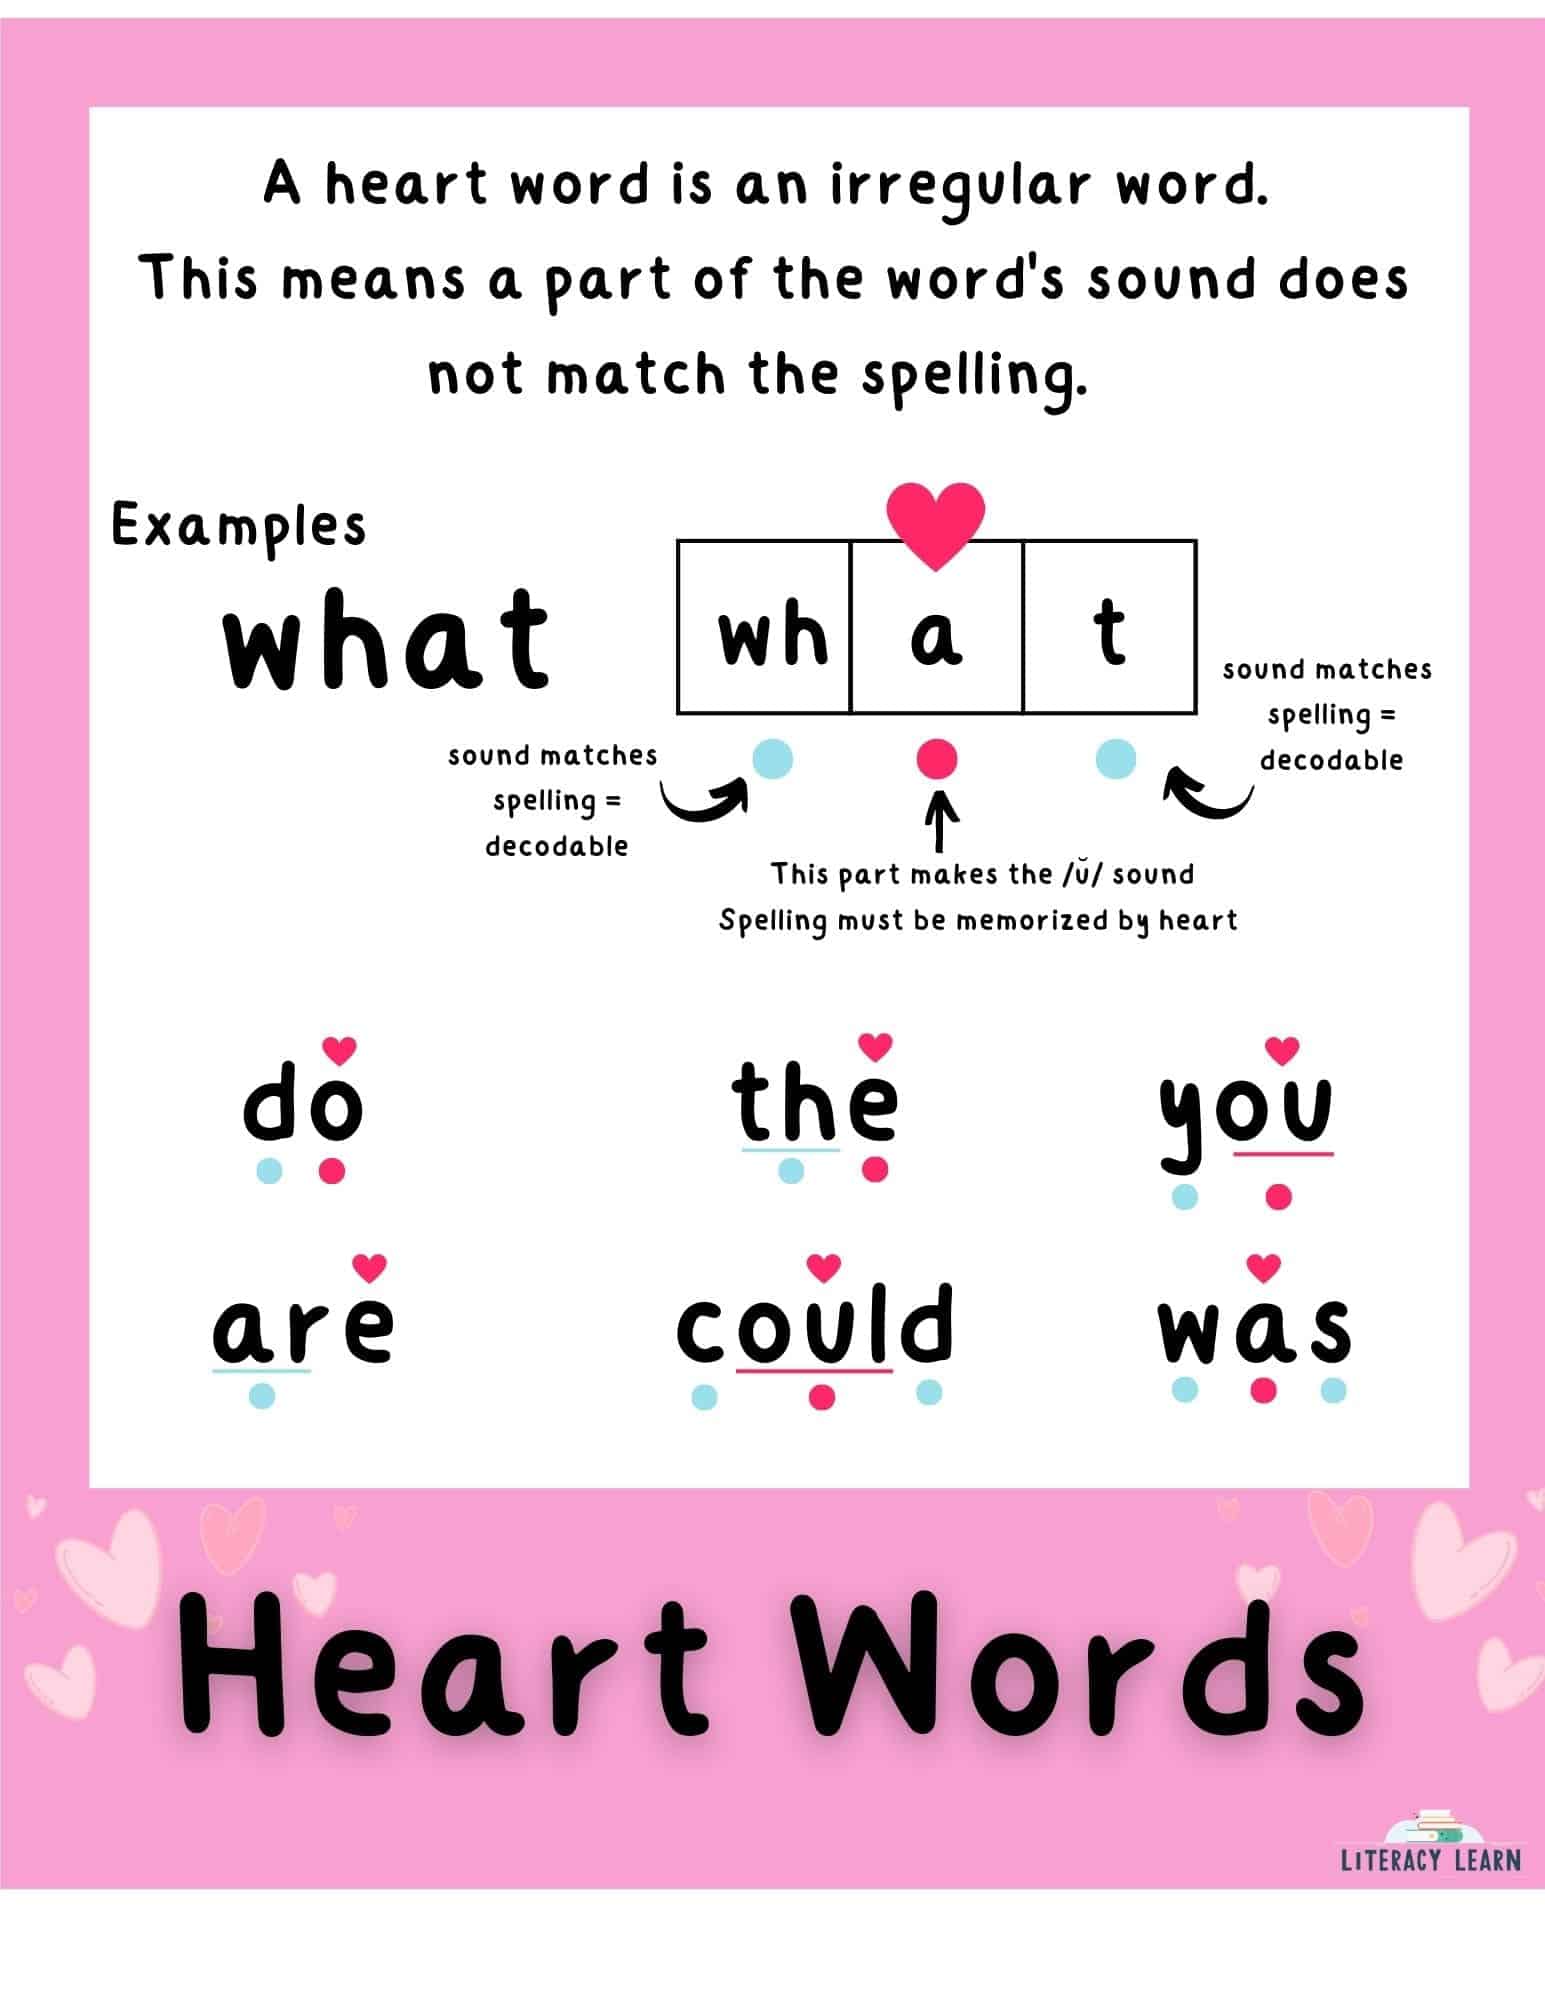 Graphic with heart word definition and examples of irregular words.